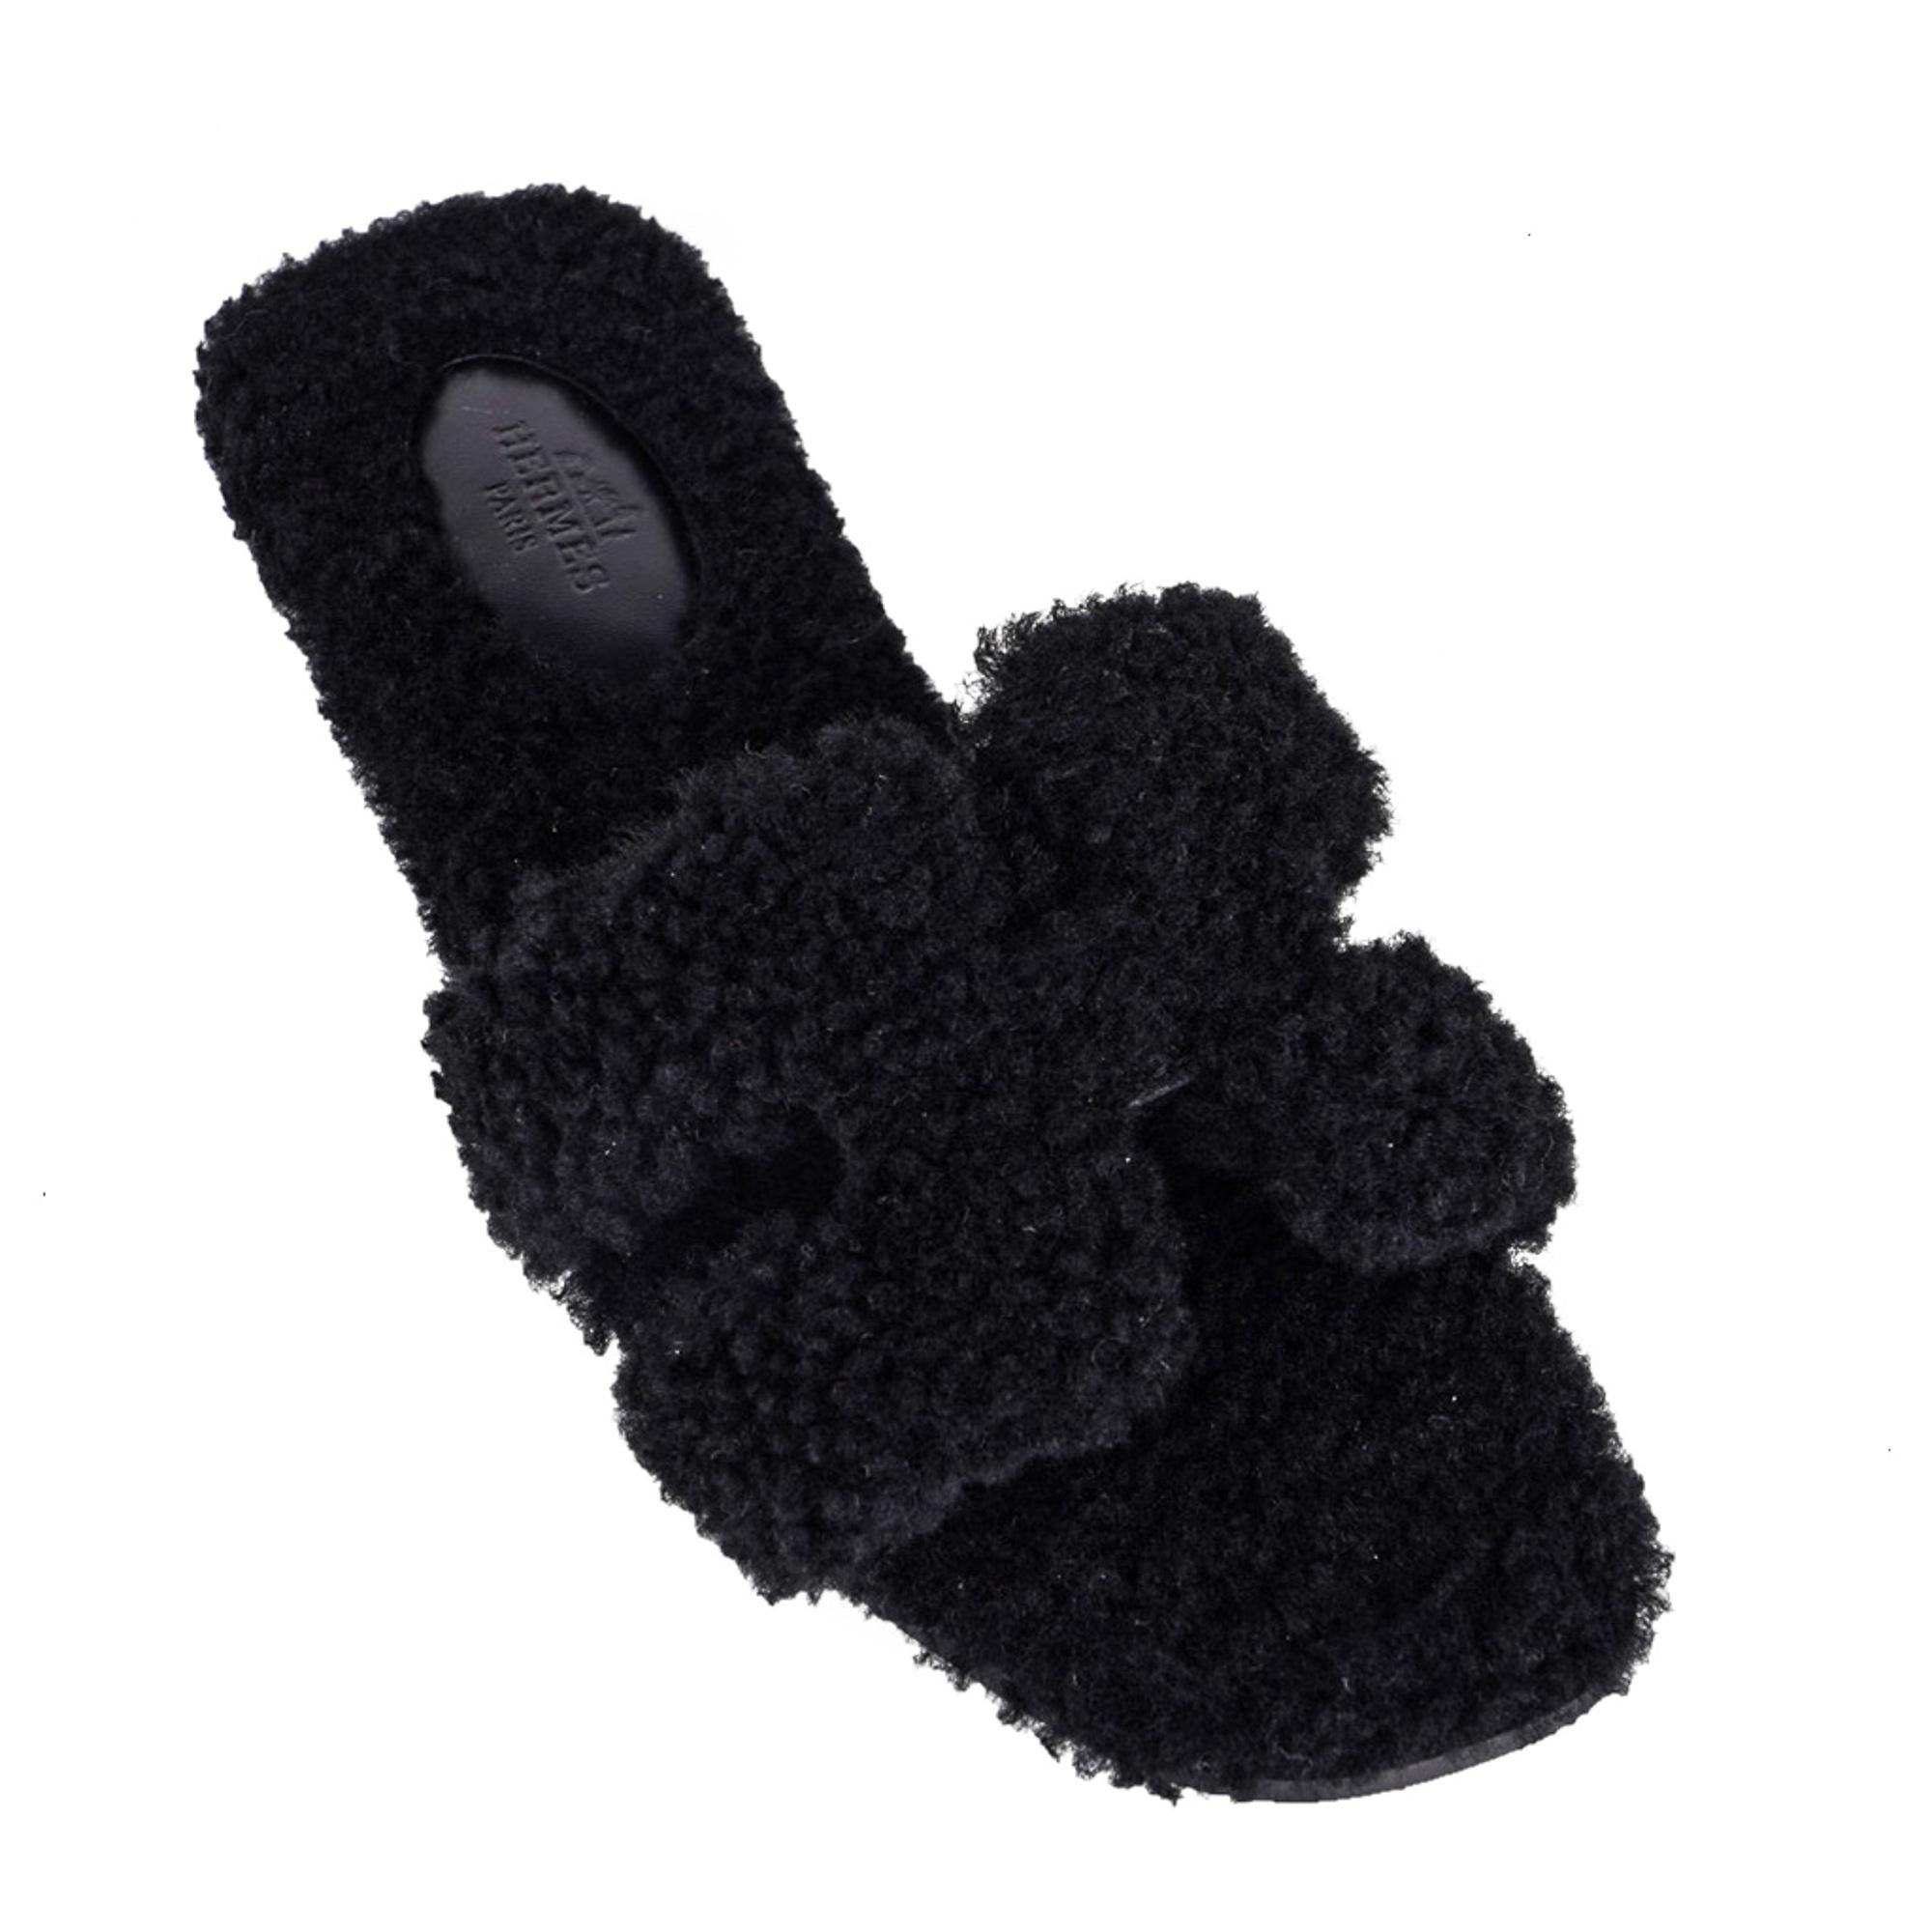 Mightychic offers a guaranteed authentic Hermes Oran Teddy Bear Black Shearling limited edition flat sandal slide.
This limited edition Hermes Oran shearling sandal is foot flirting perfection!
Embossed Hermes Paris leather insole.
Wood heel.
Comes